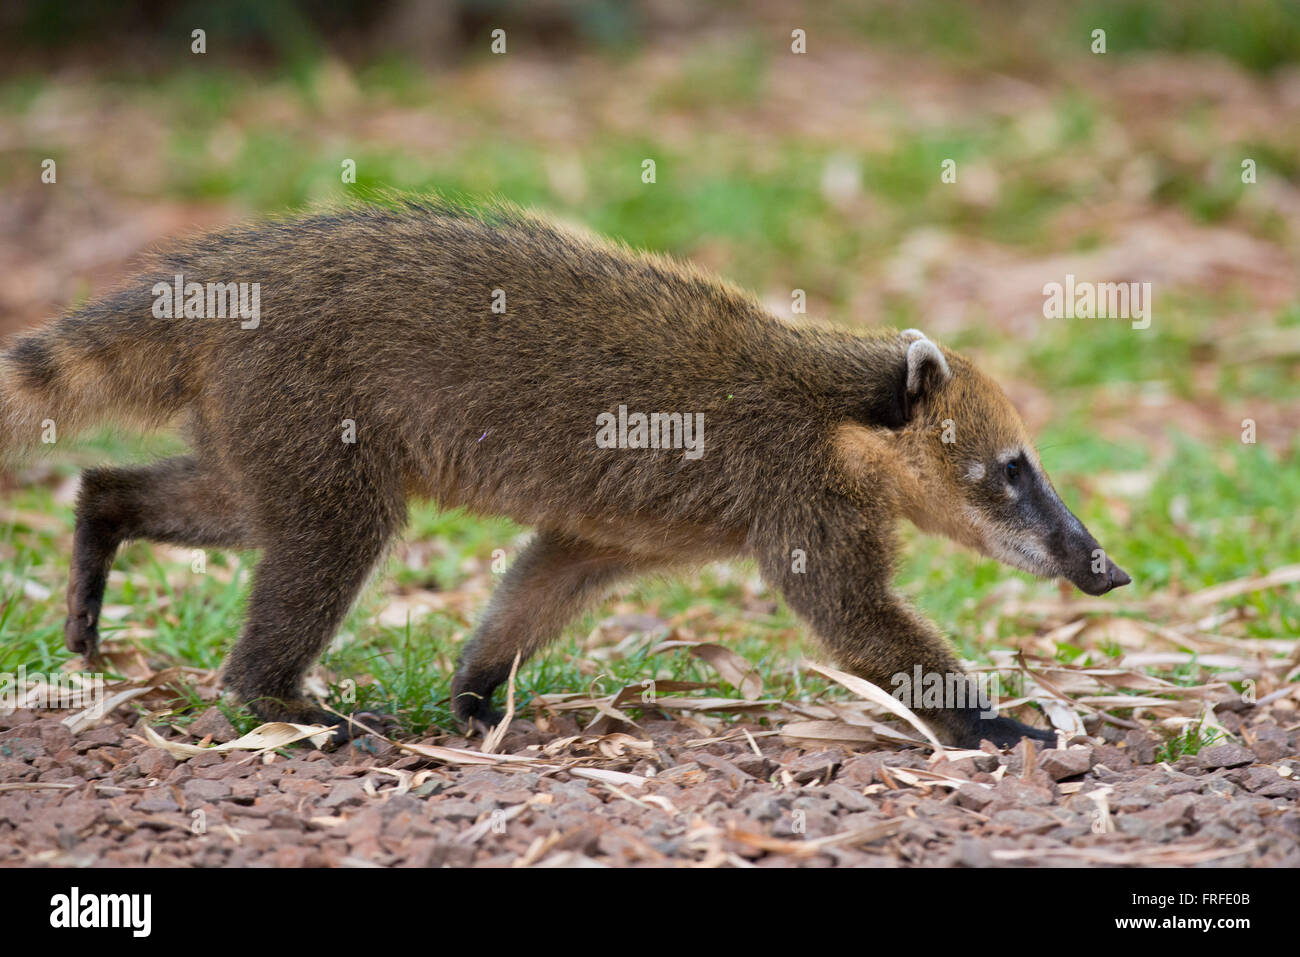 A coati, with its long nose, in Iguazu National Park between Argentina and Brazil Stock Photo